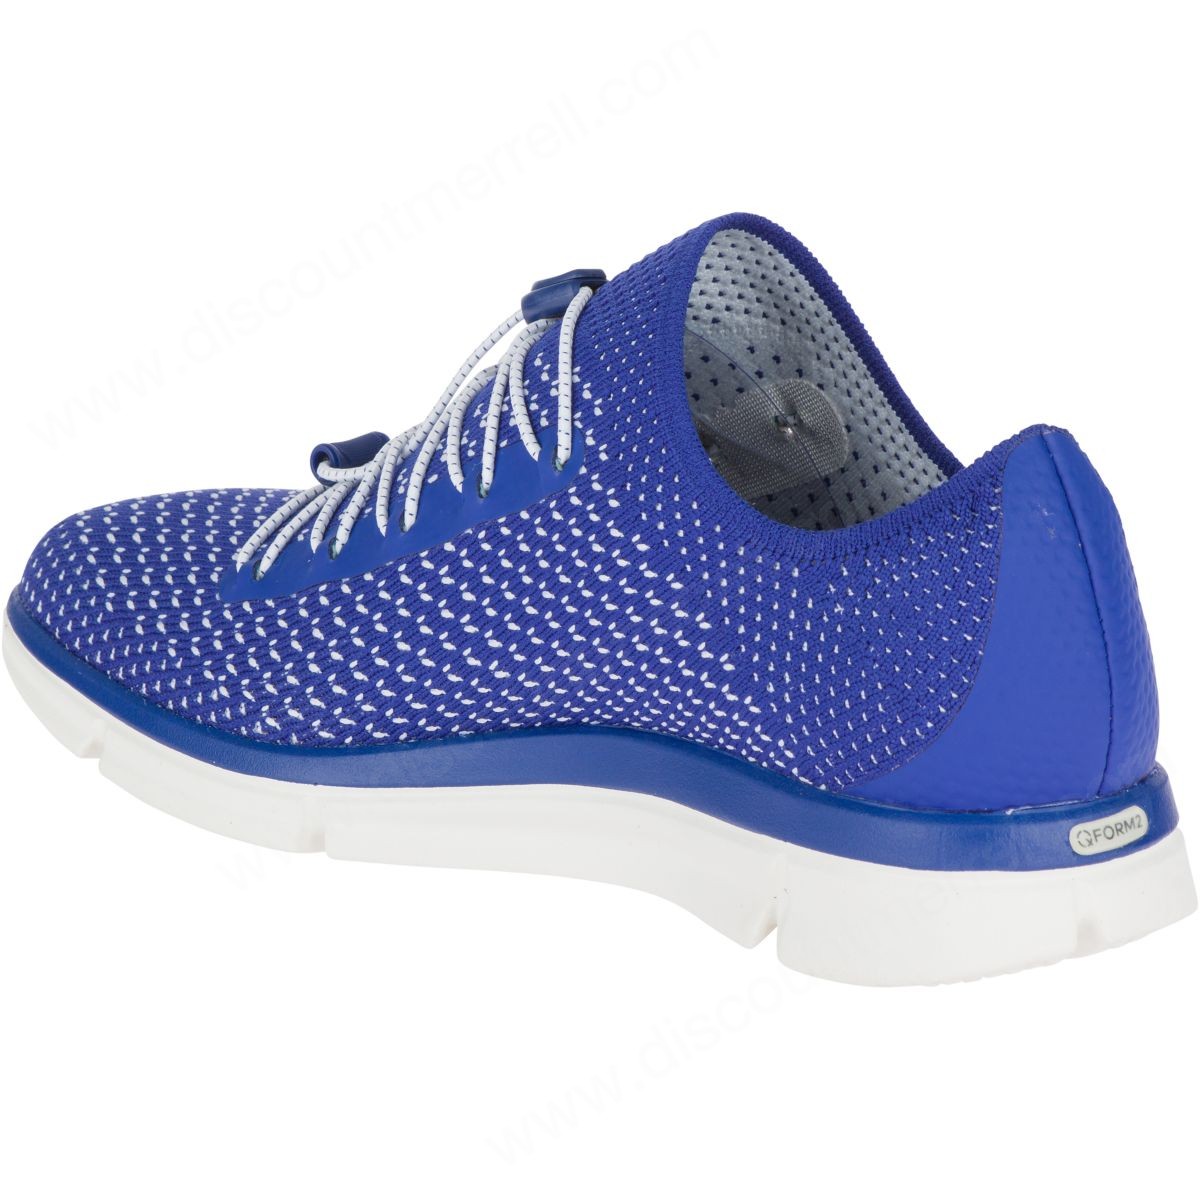 Merrell Lady's Zoe Sojourn Lace Knit Q2 Sodalite - -6